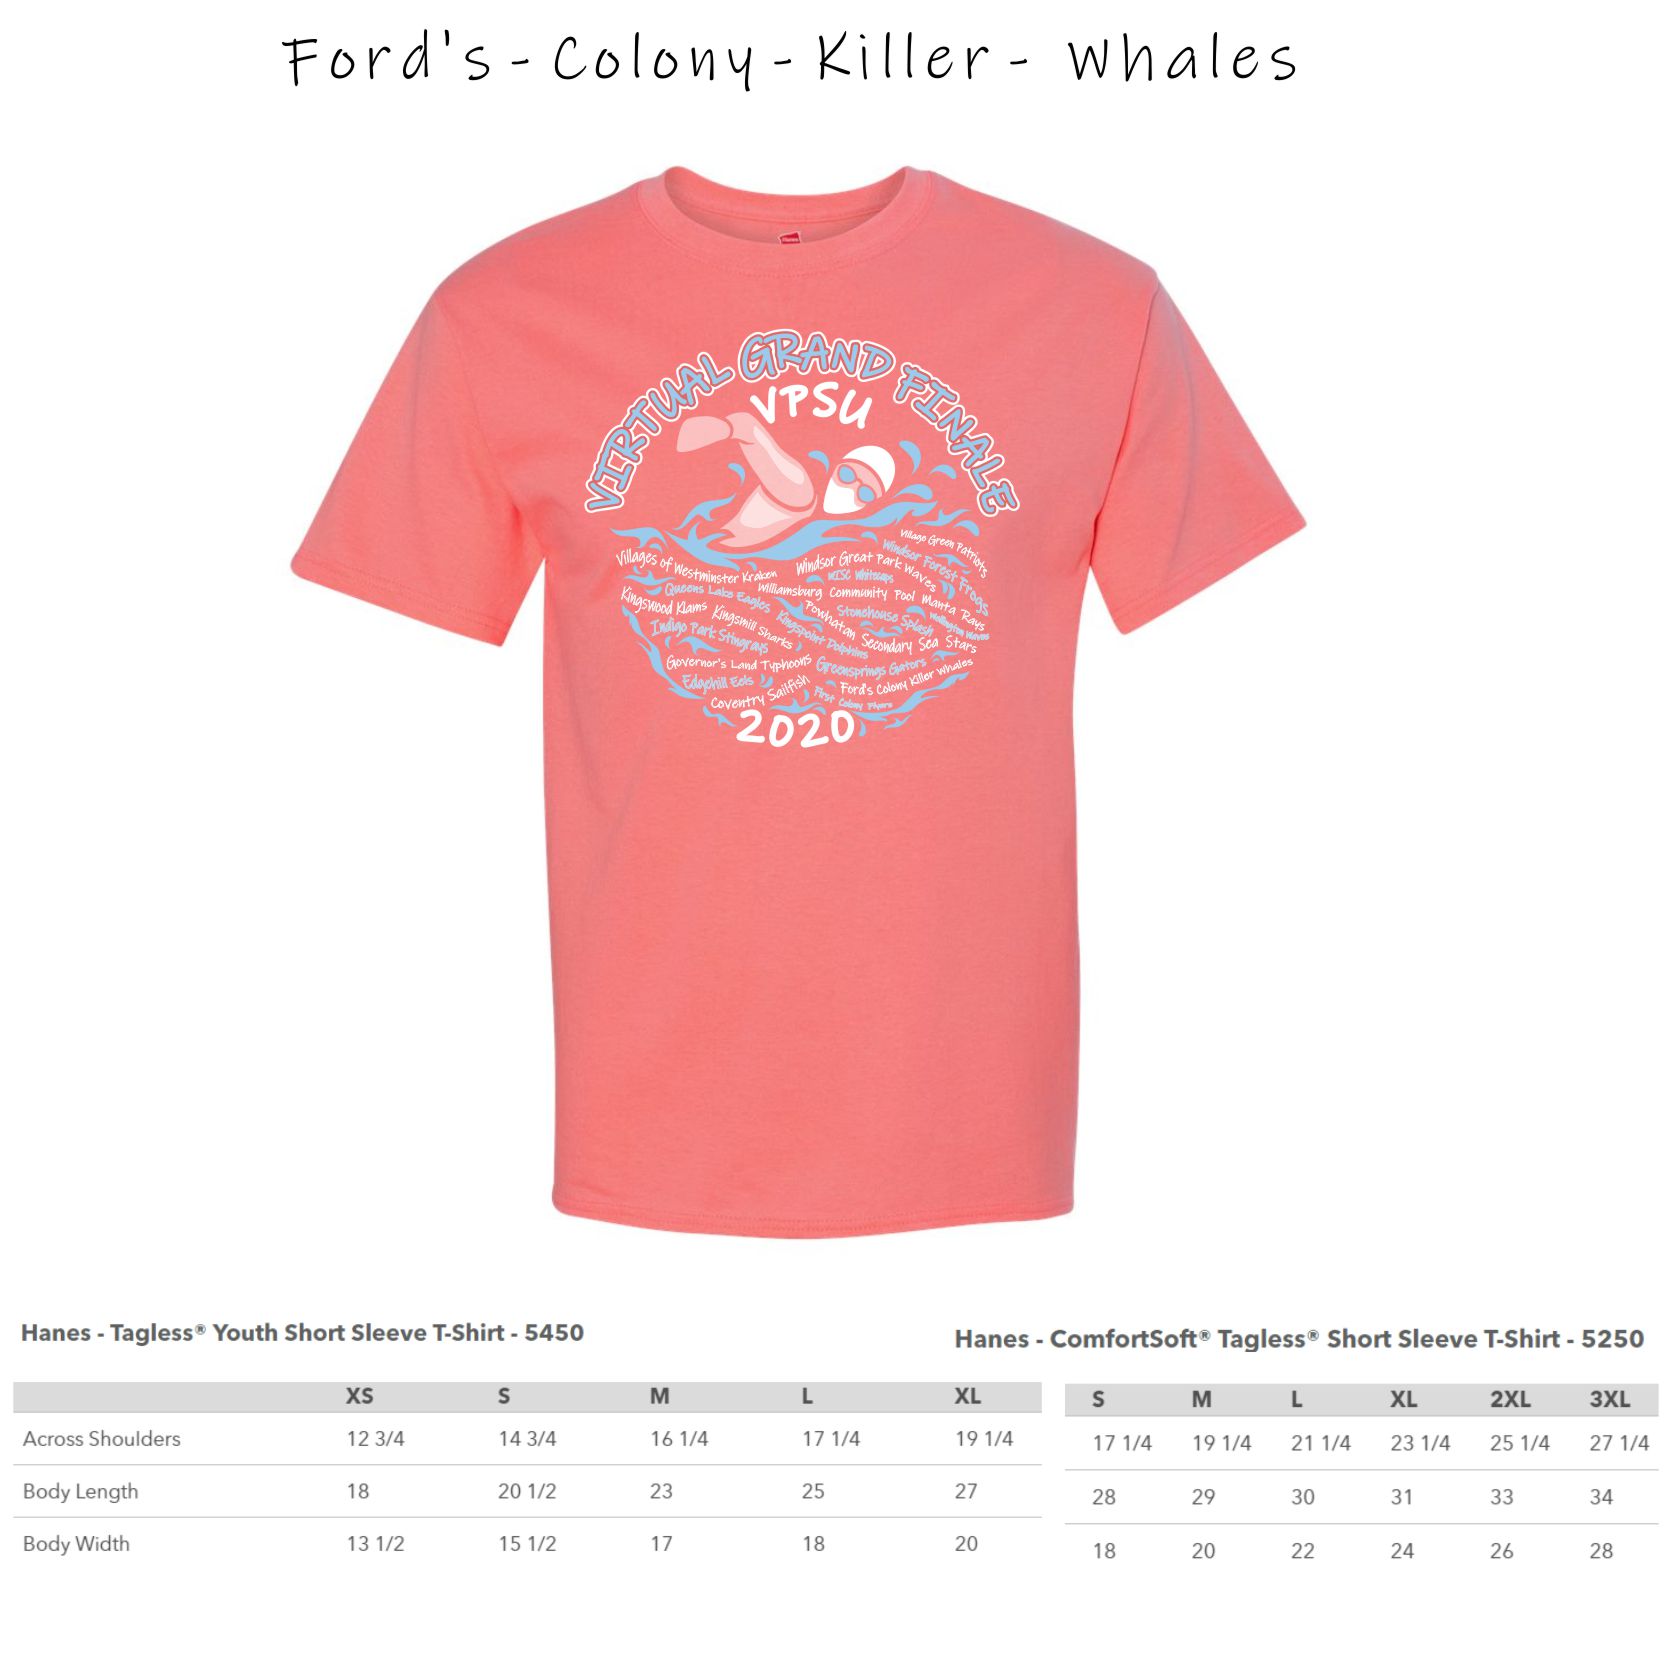 1 - Ford's Colony Killer Whales